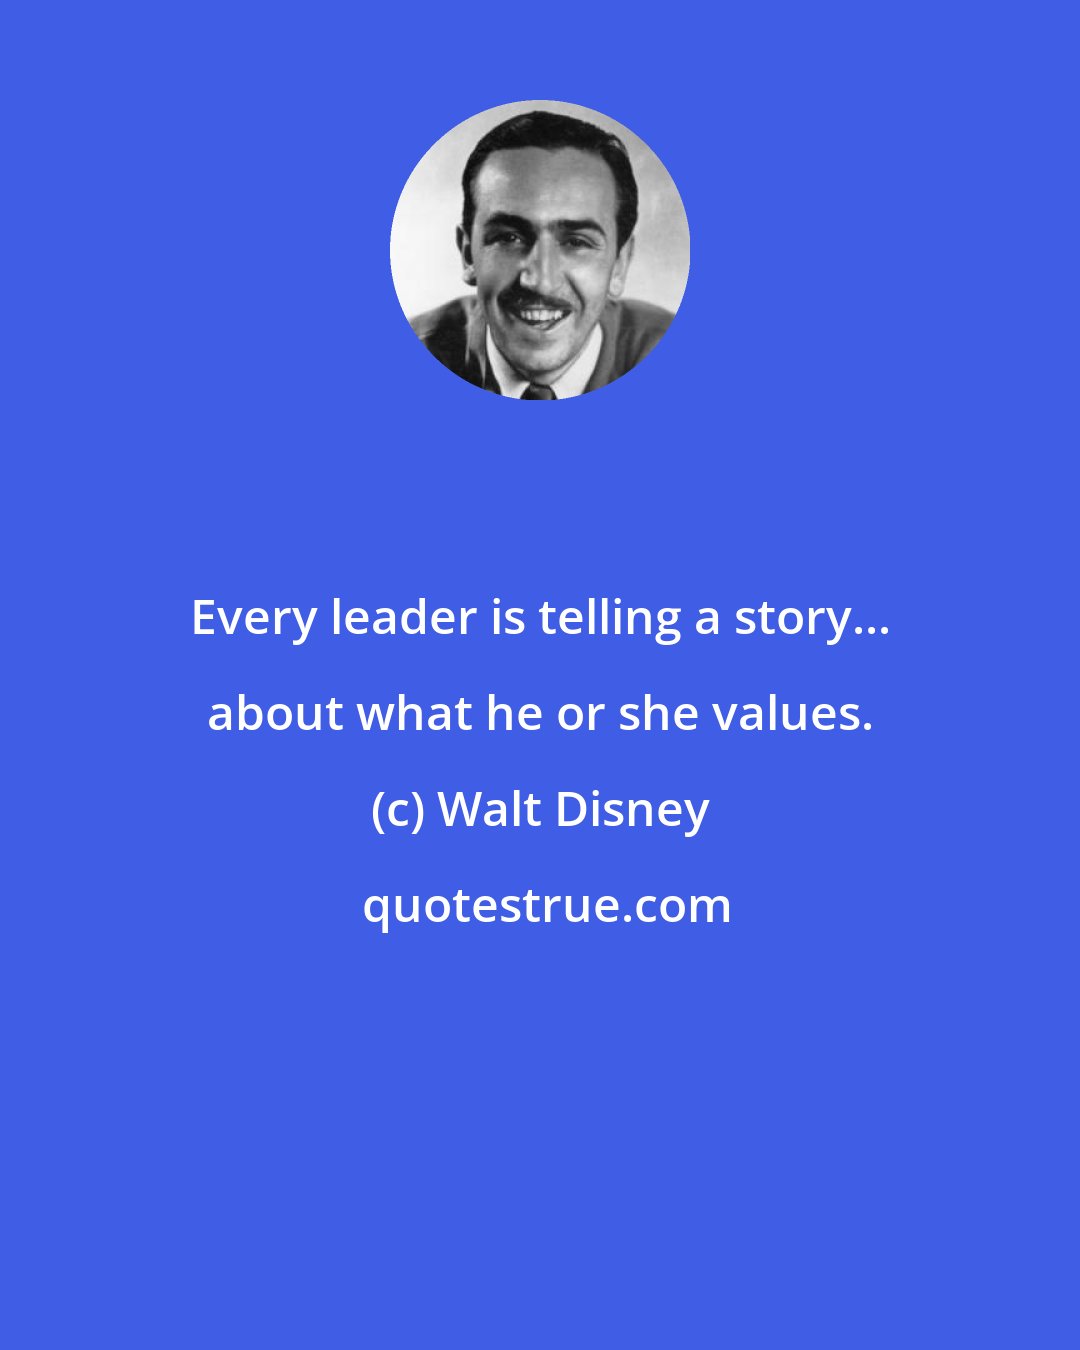 Walt Disney: Every leader is telling a story... about what he or she values.